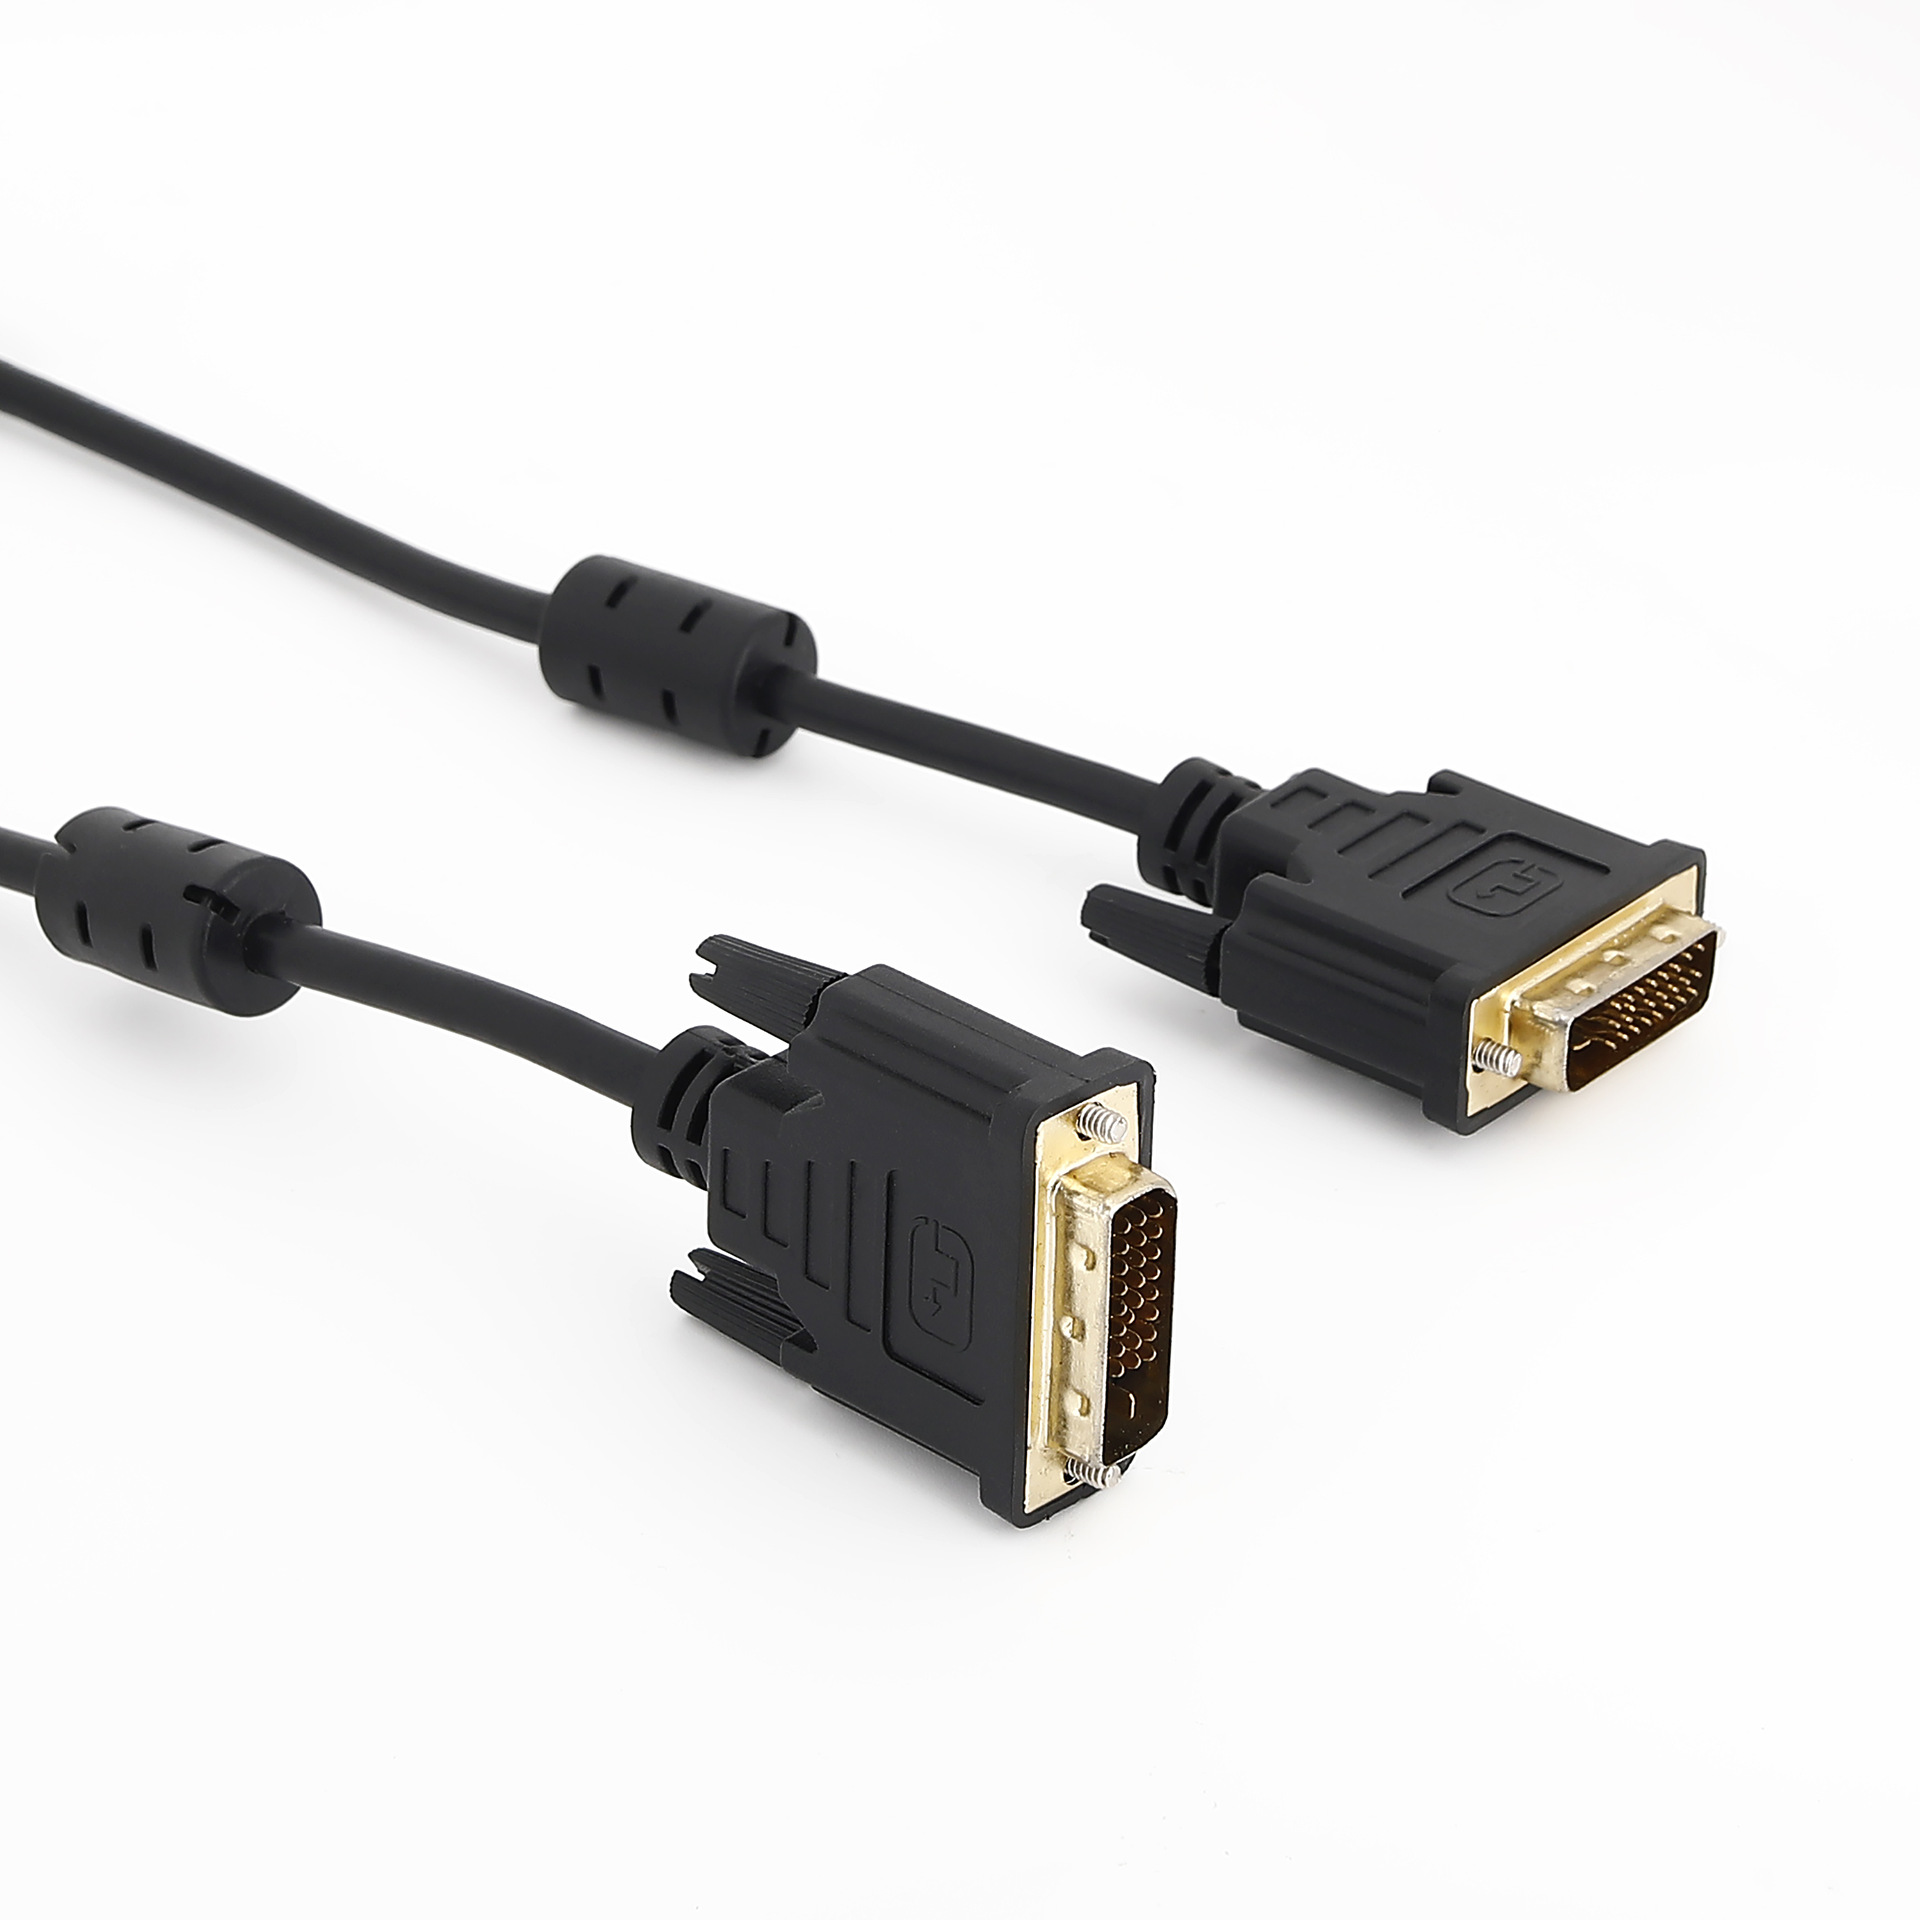 Amewire Great Quality DVI to DVI-D 24+1 Cable Male to Male Digital Video Monitor Cable DVI Cable for HDTV Gaming Monitor PC